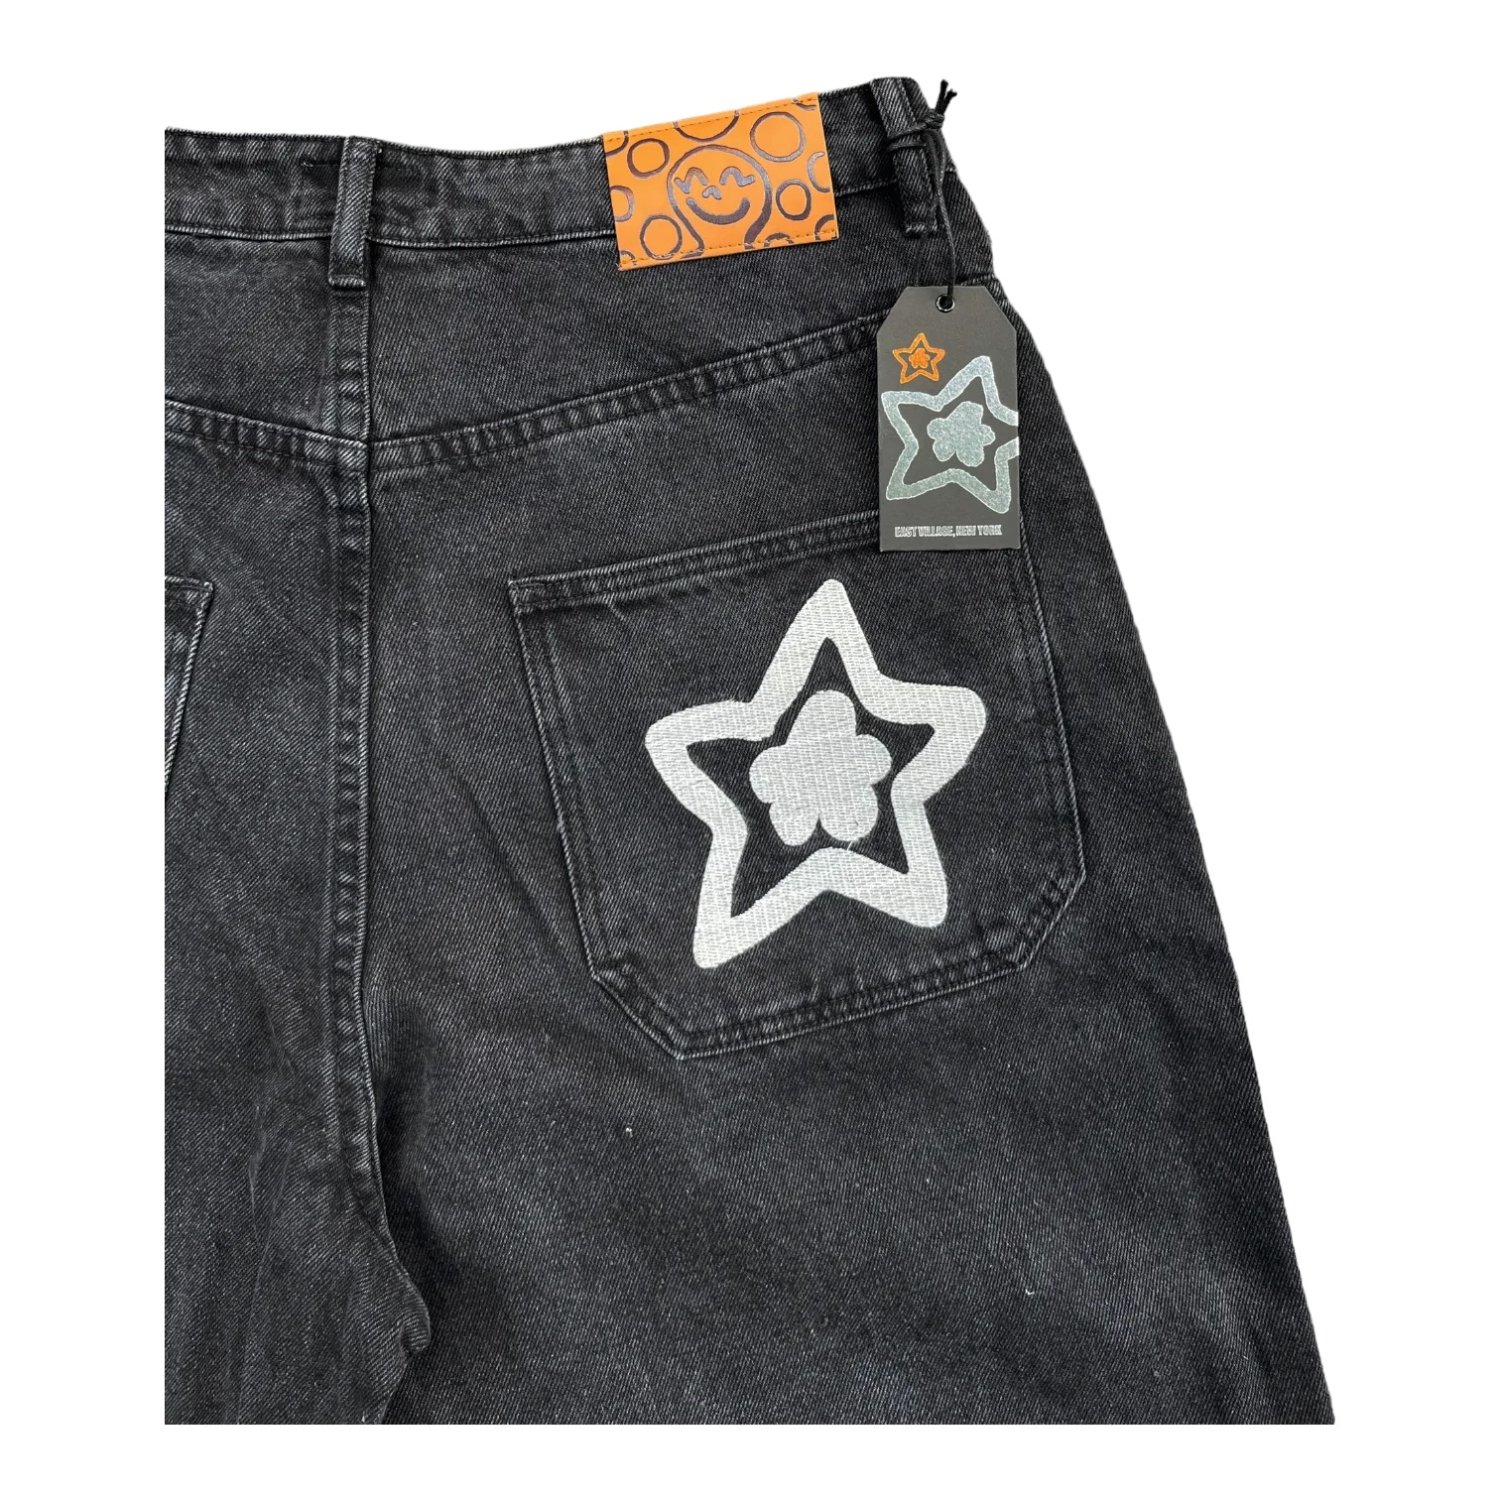 STAR TEAMZip Off Star Jeans - Apple Butter Store